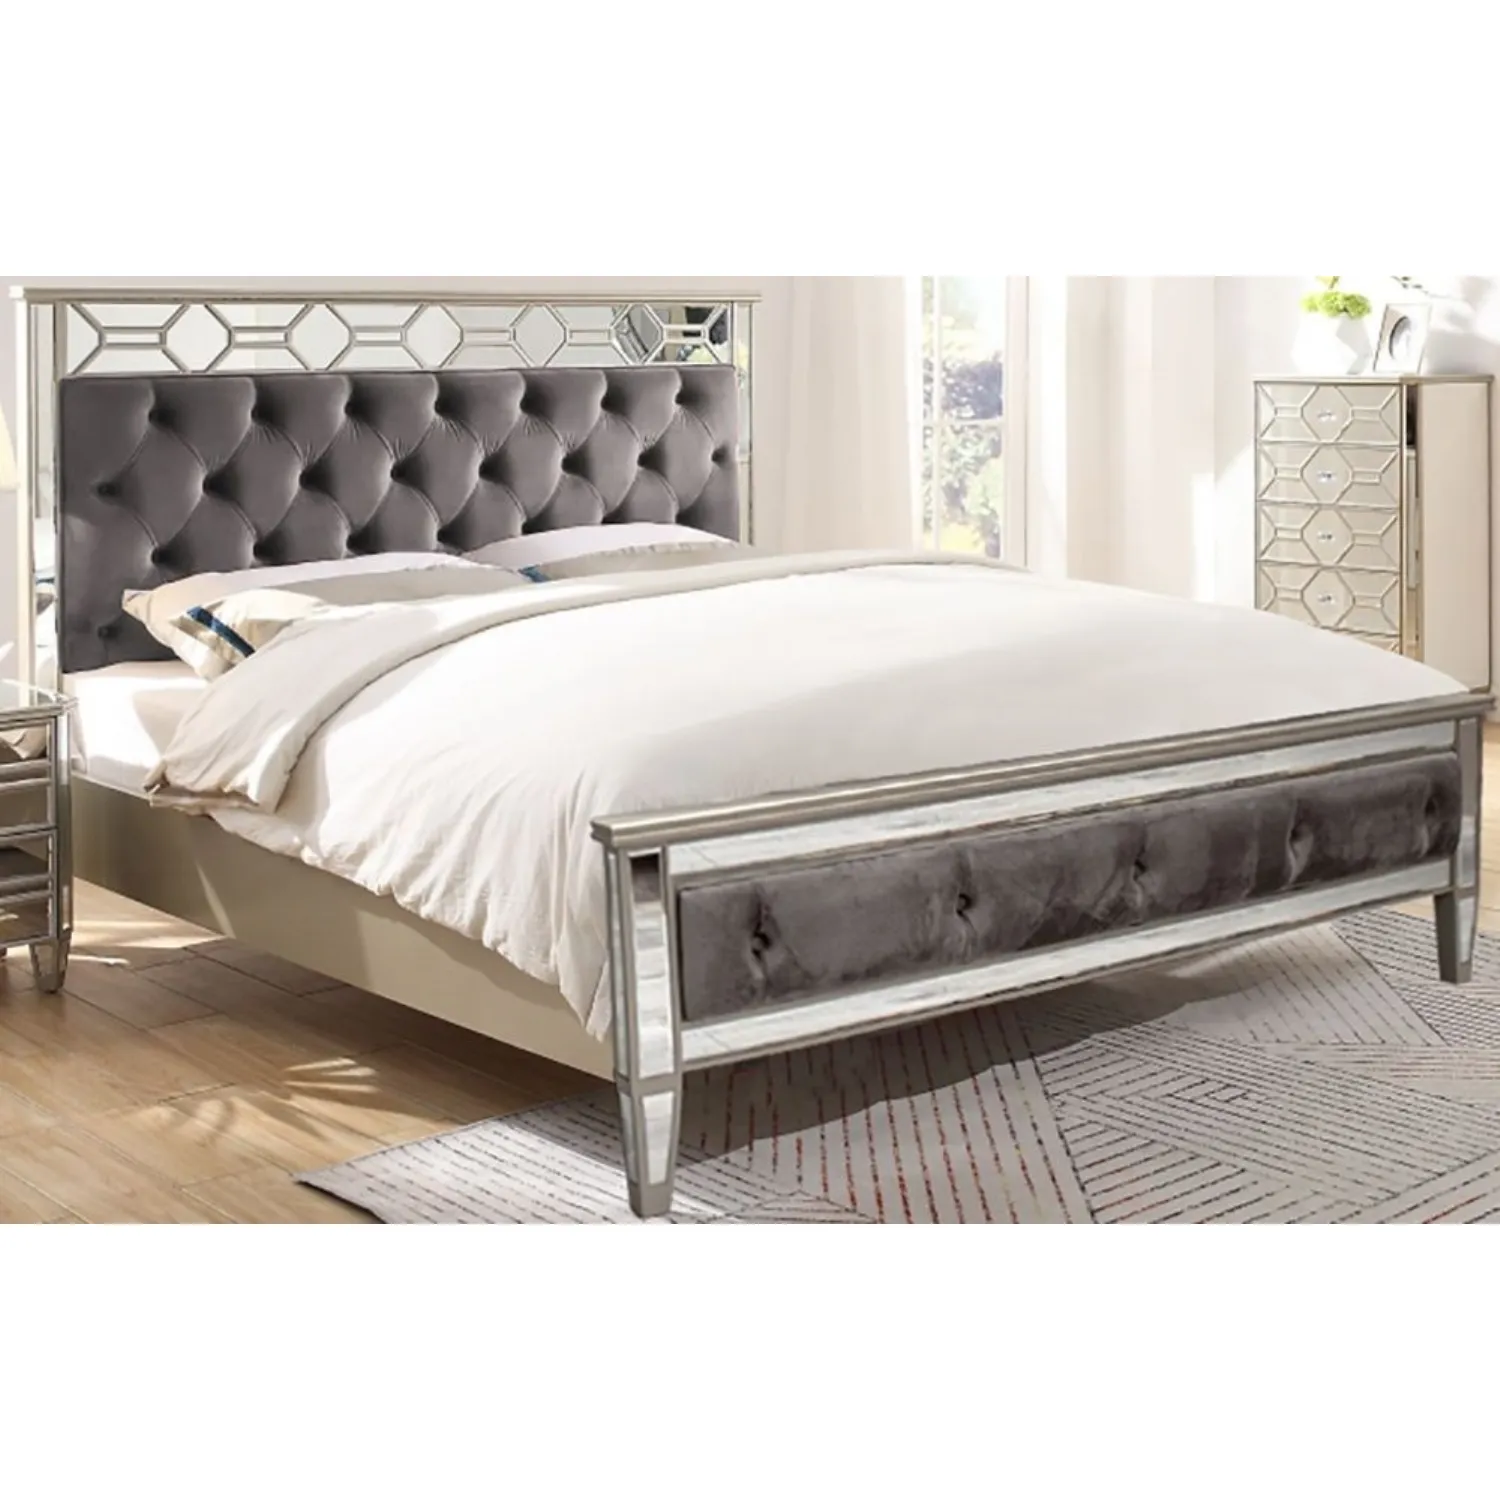 Silver Mirrored Glass Upholstered King Size Bed